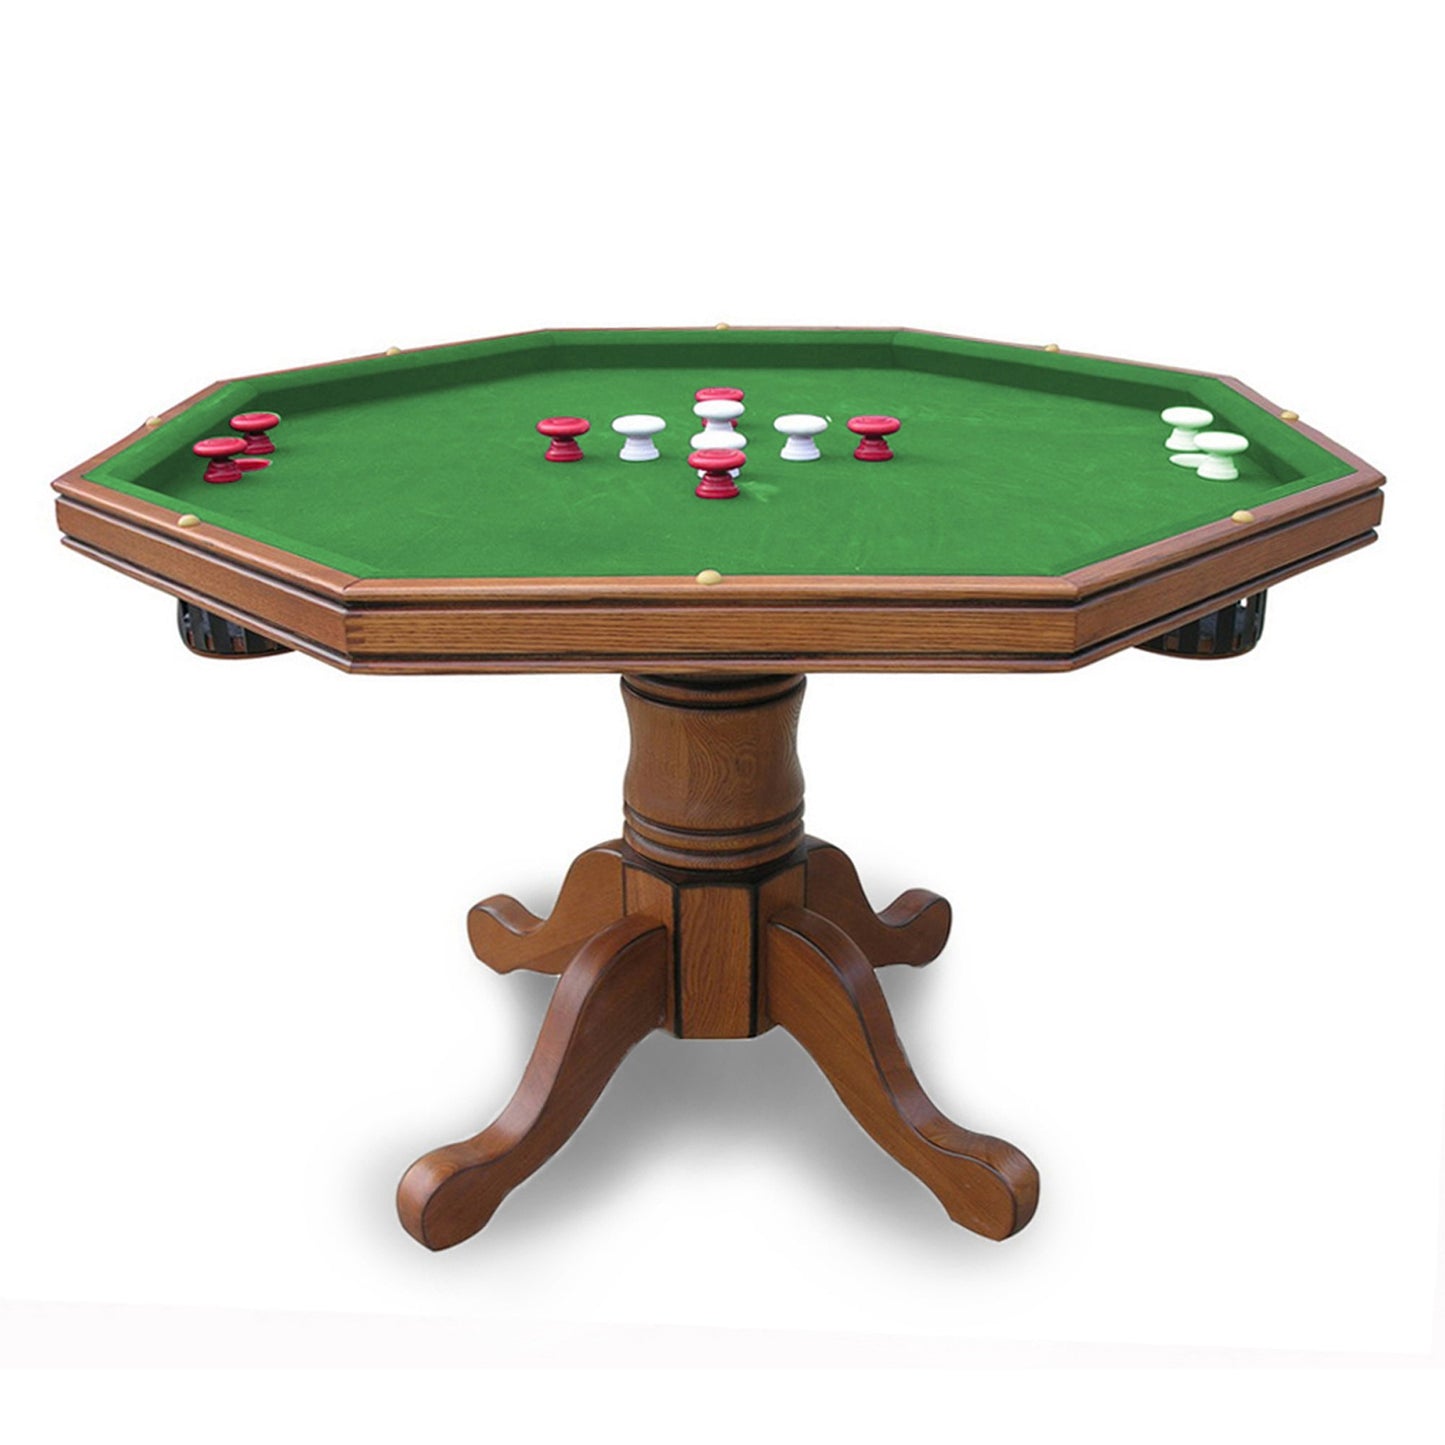 Hathaway Kingston Oak 3 in 1 Poker Table Set with 4 Arm Chairs - Gaming Blaze